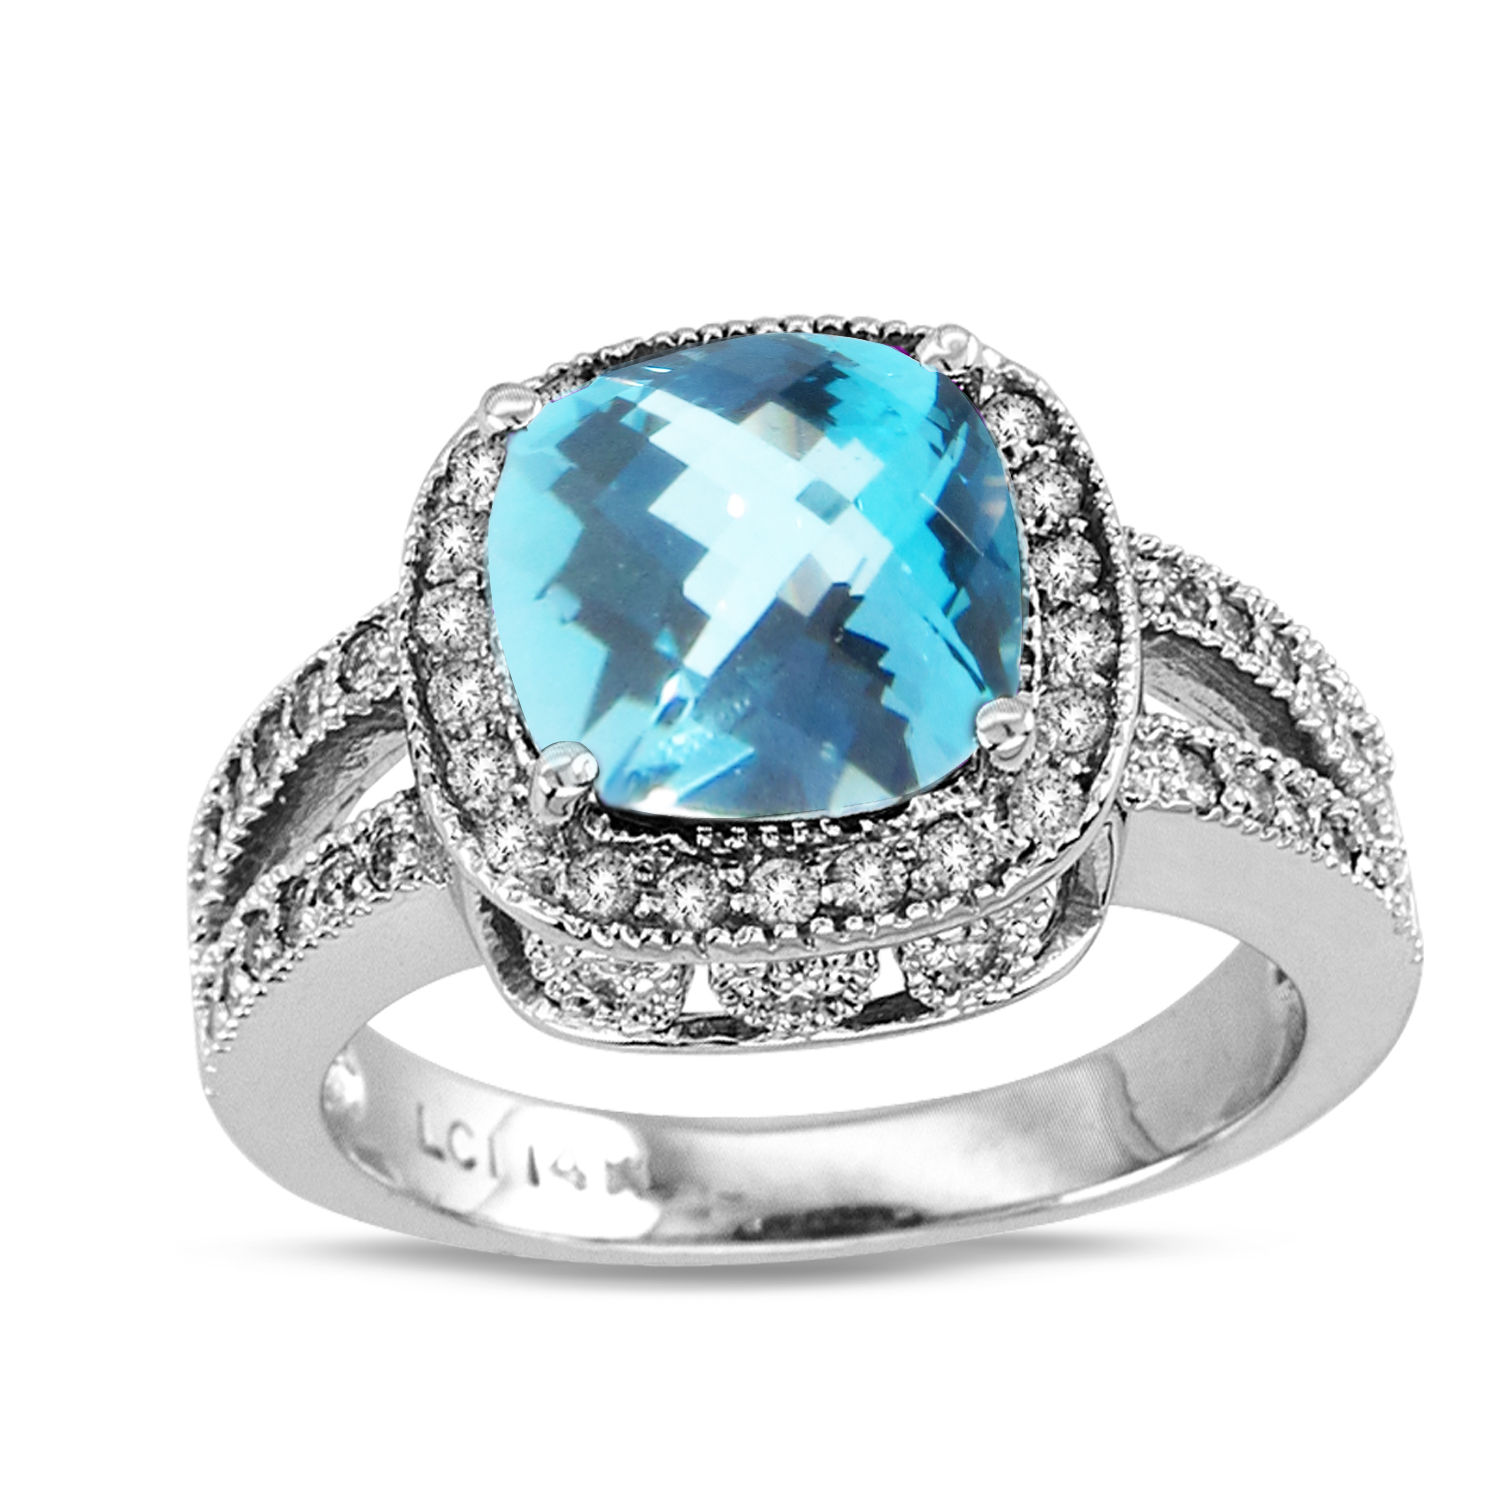 14k Gold Split Shank Ring with 0.50ct tw of Round Diamonds and 9mm Cushion Cut Checkerboard Cut Blue Topaz Center Stone